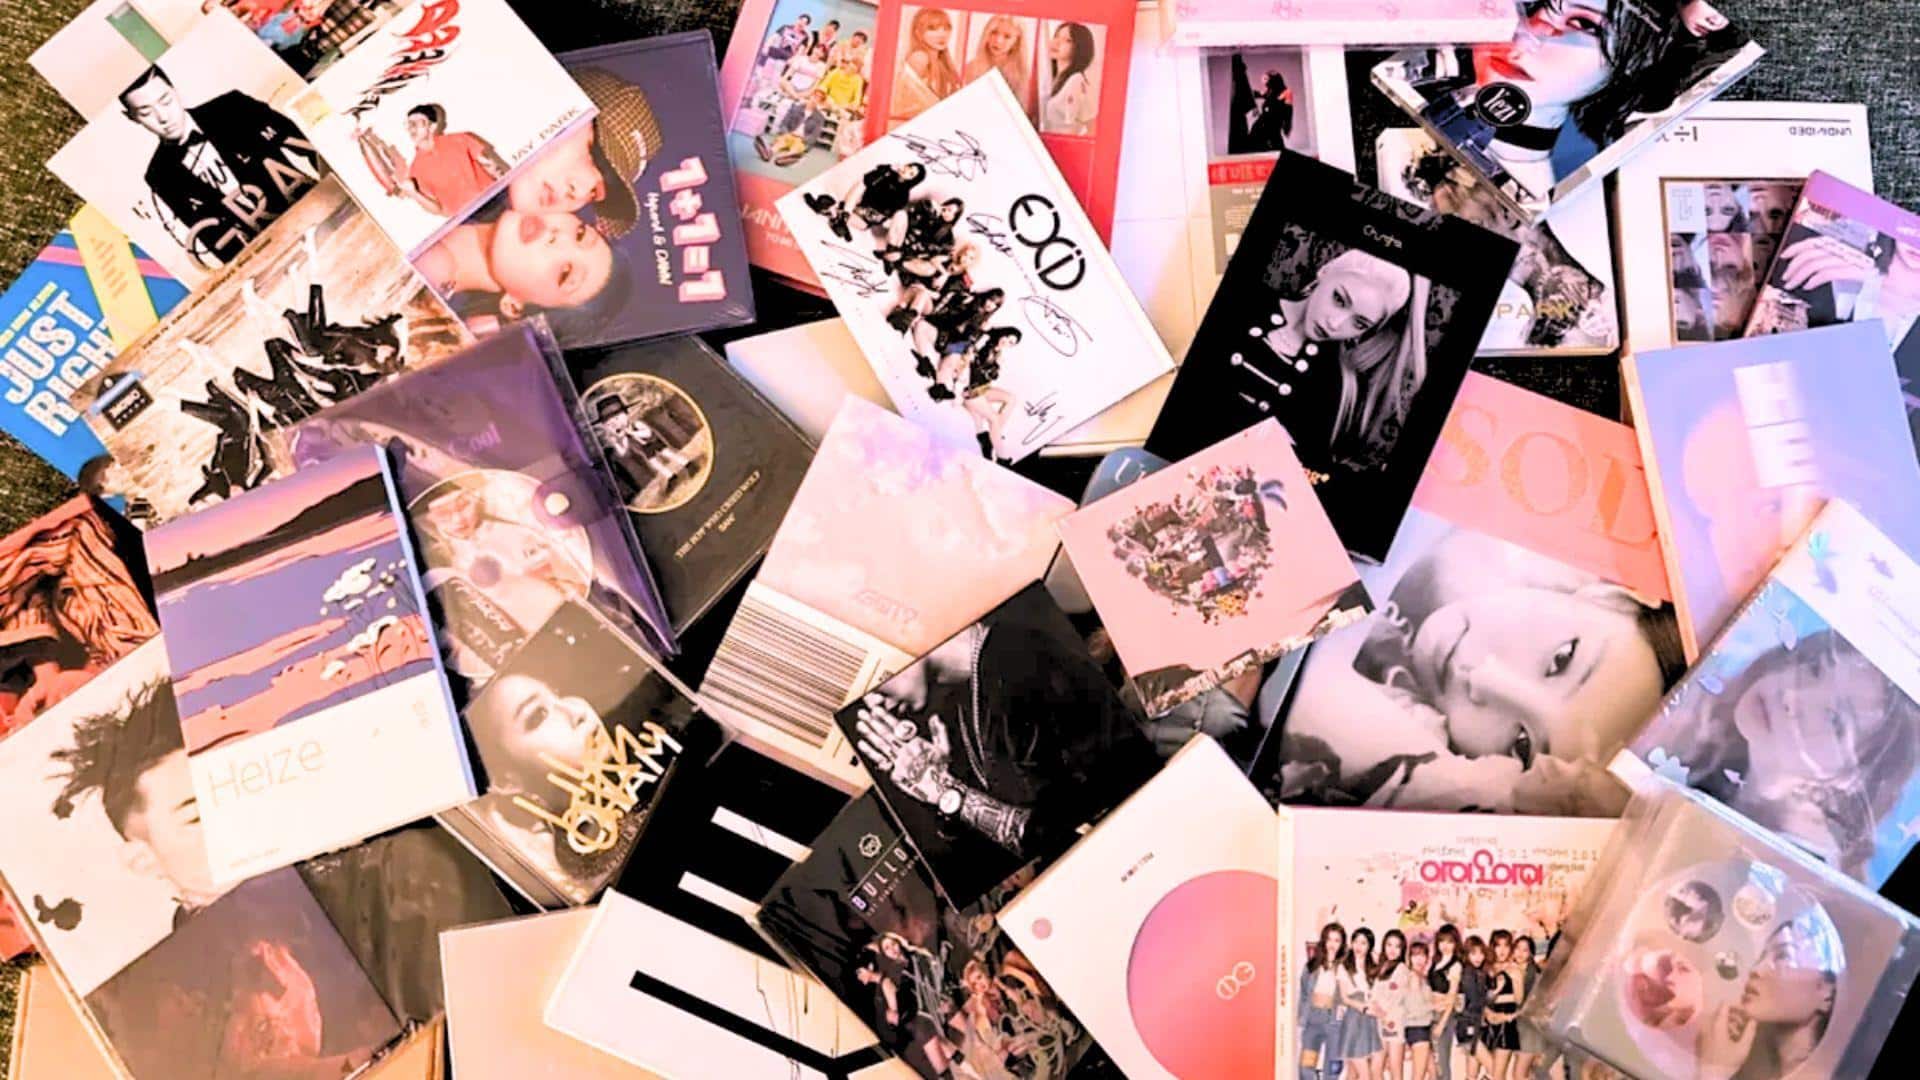 Explainer: Why physical albums are still popular among K-pop fans